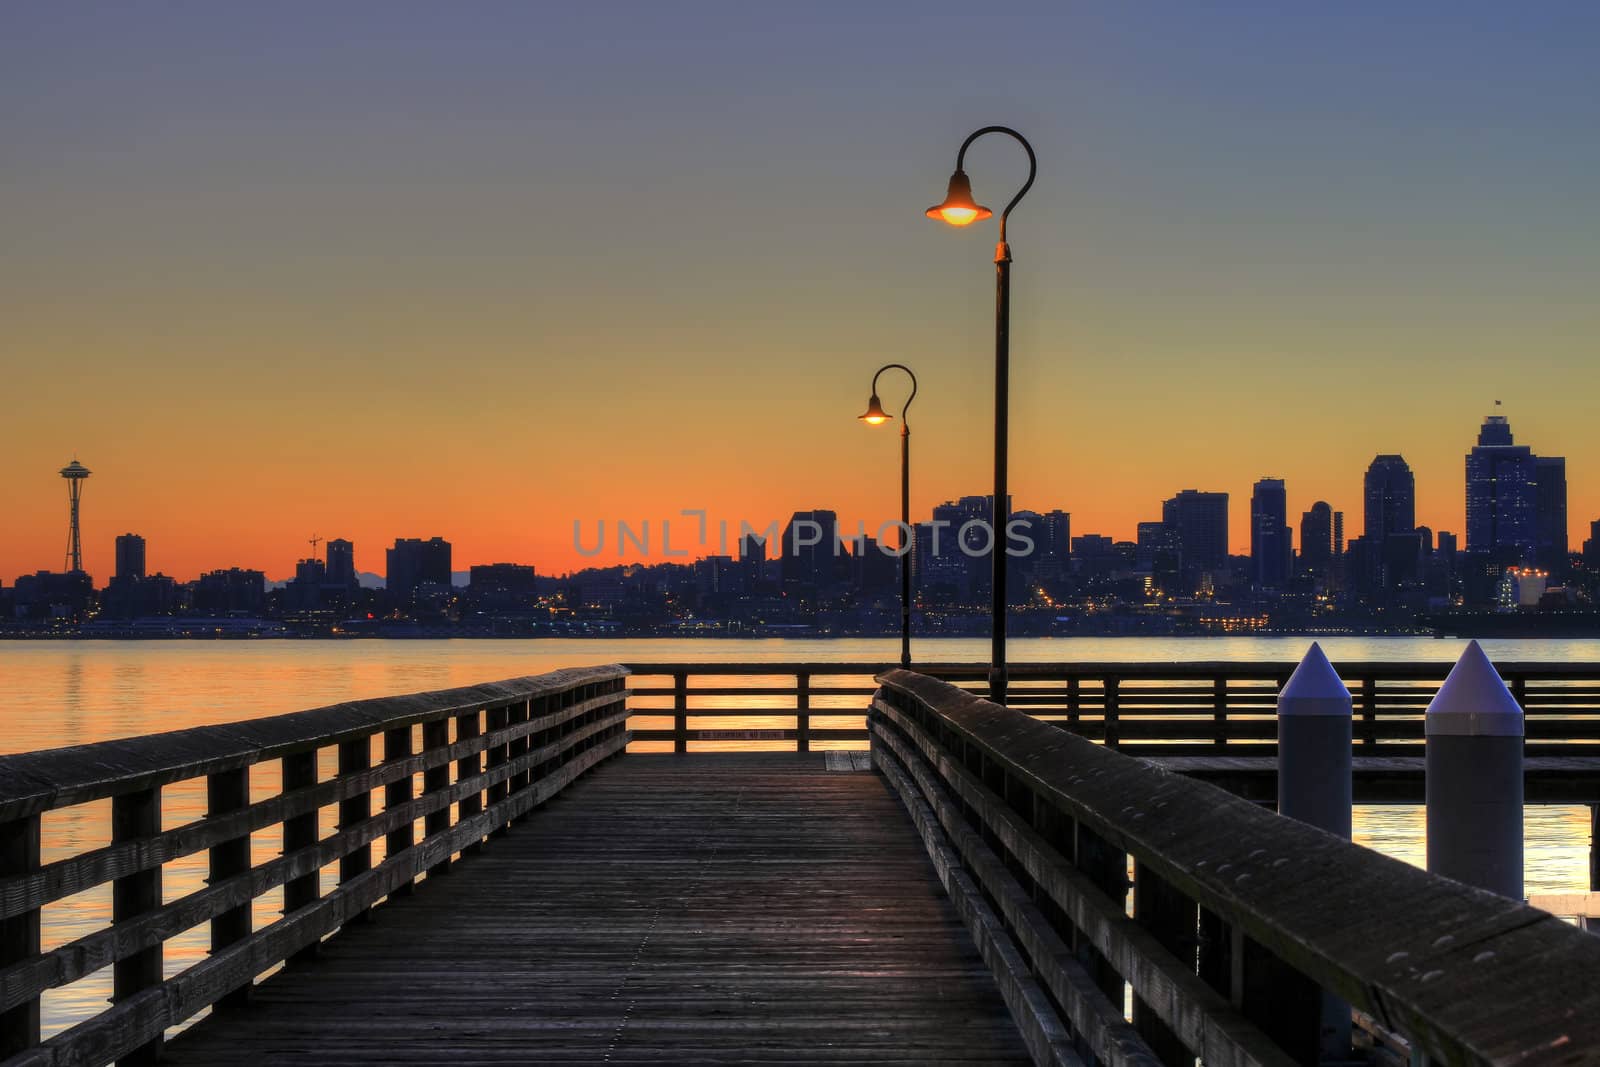 Seattle Skyline from the Pier at Sunrise by Davidgn